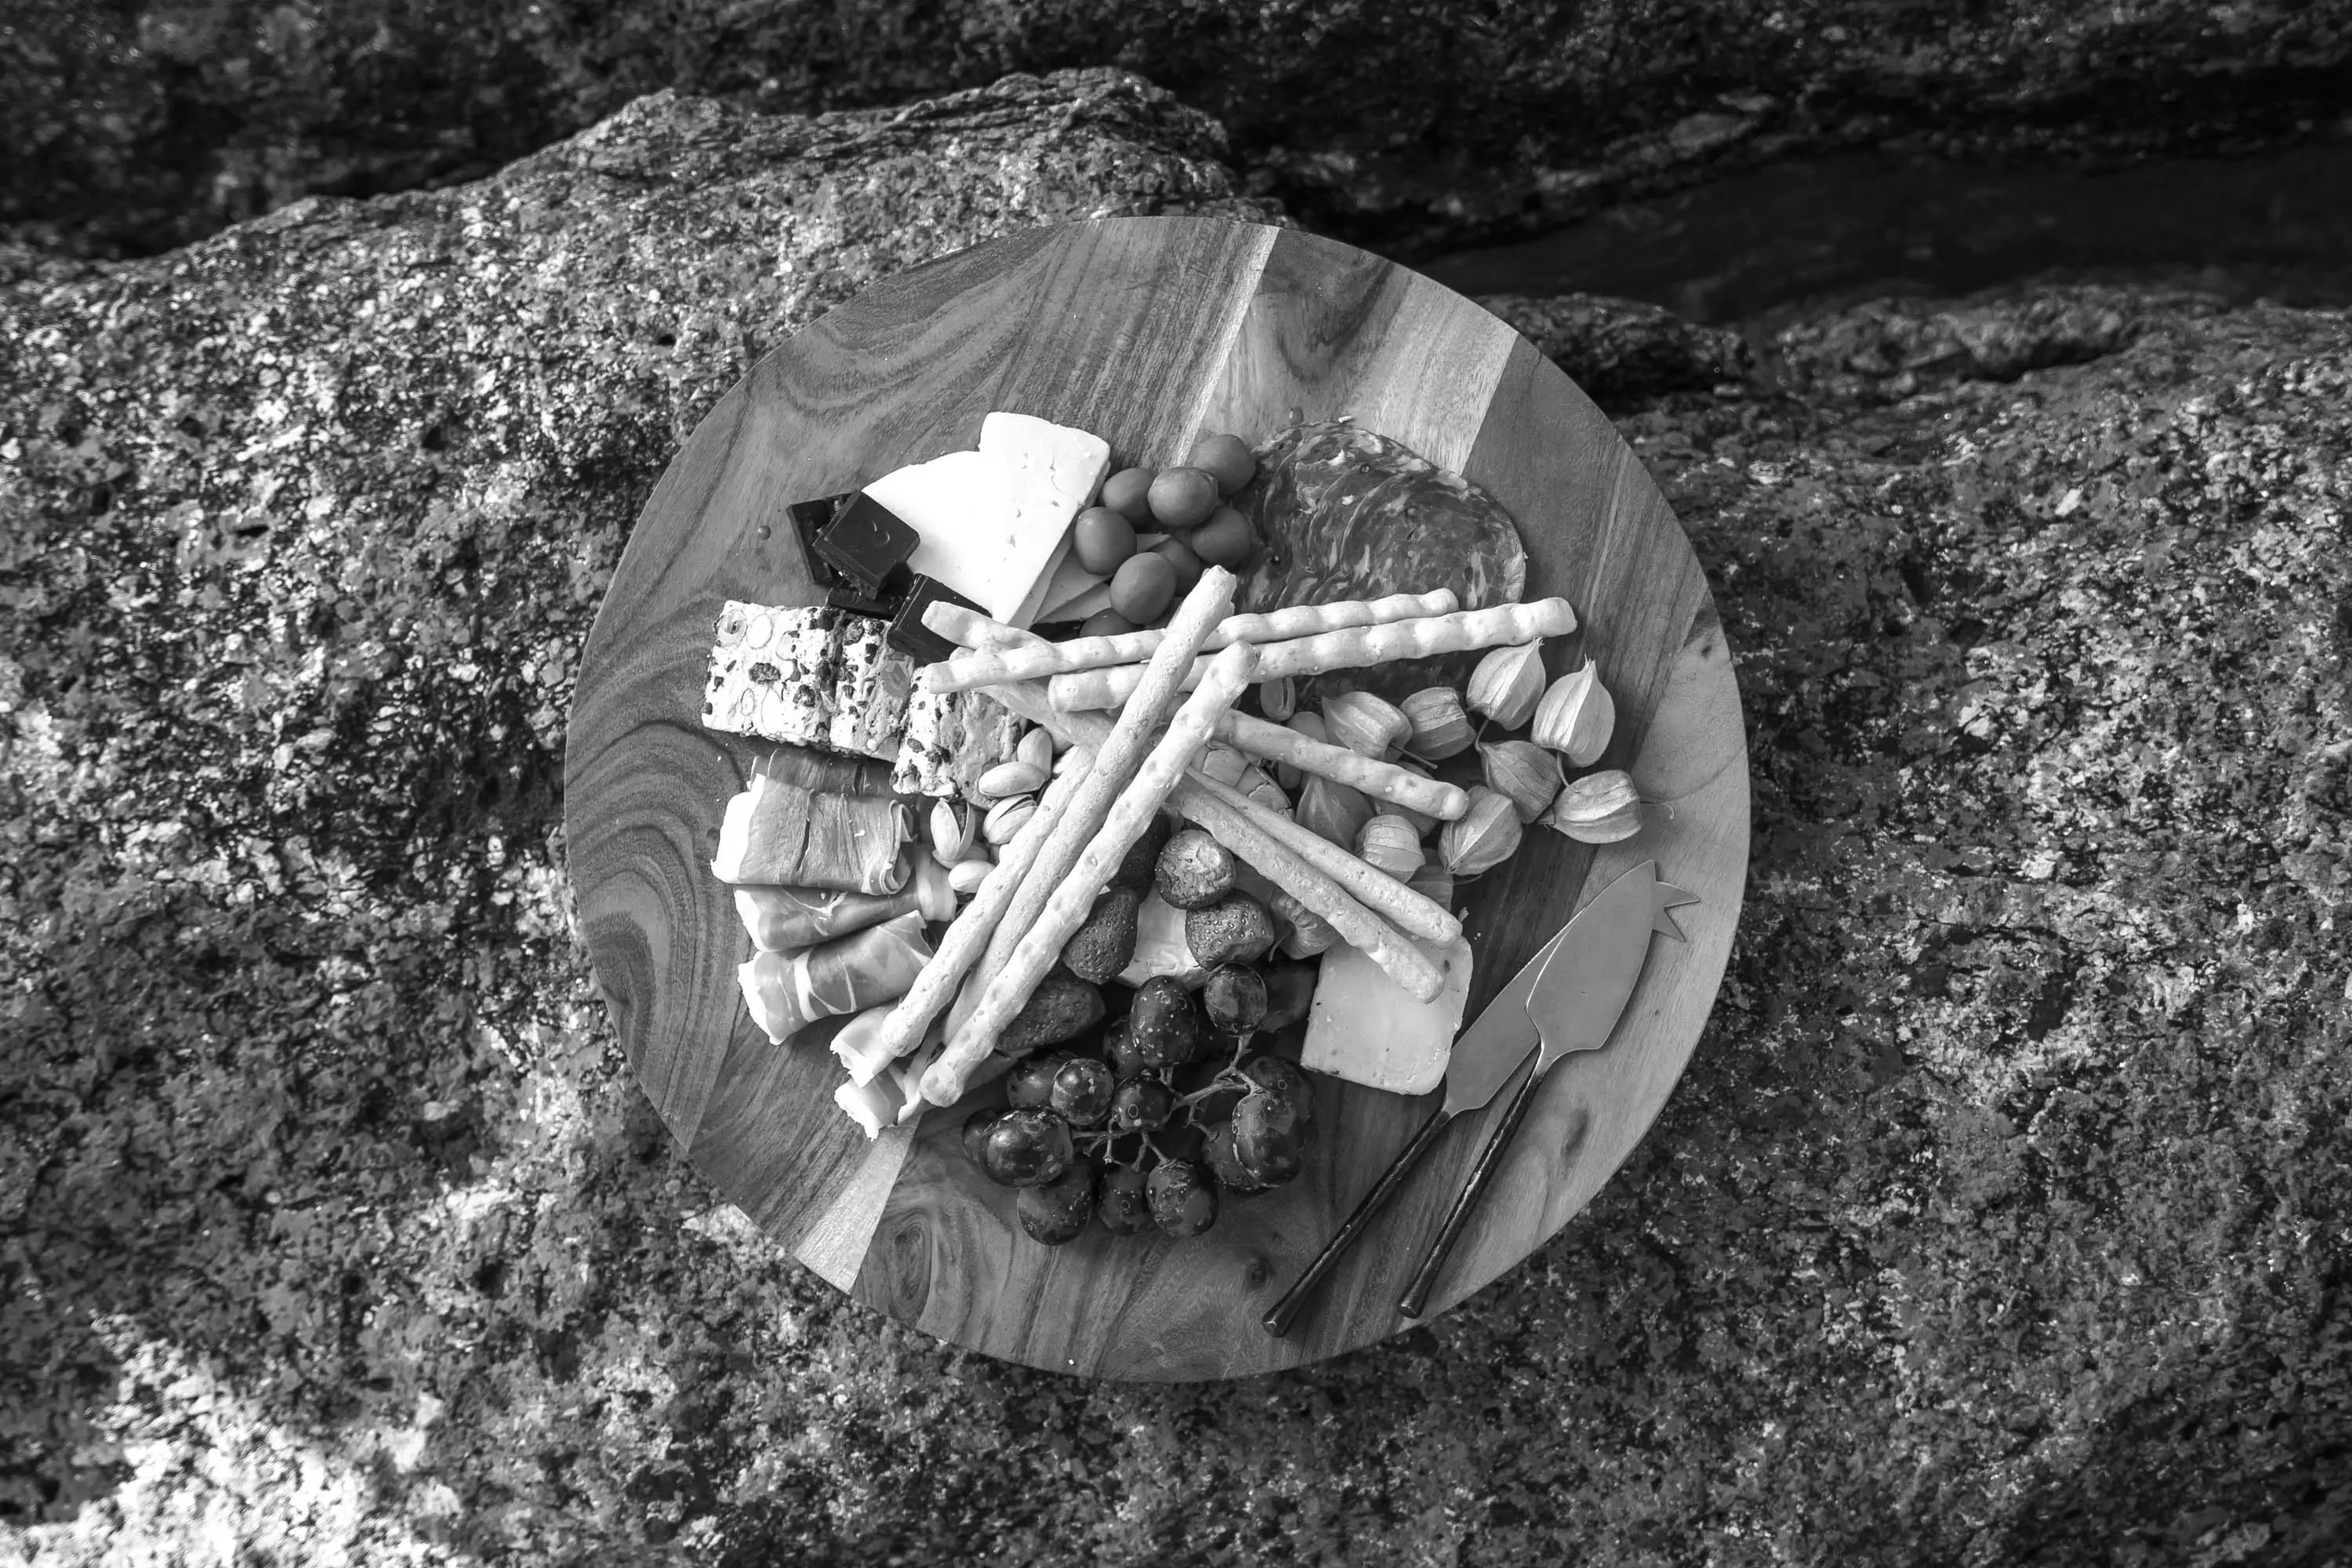 A wooden platter of meats, cheese, dates and bread sticks placed on rocks.